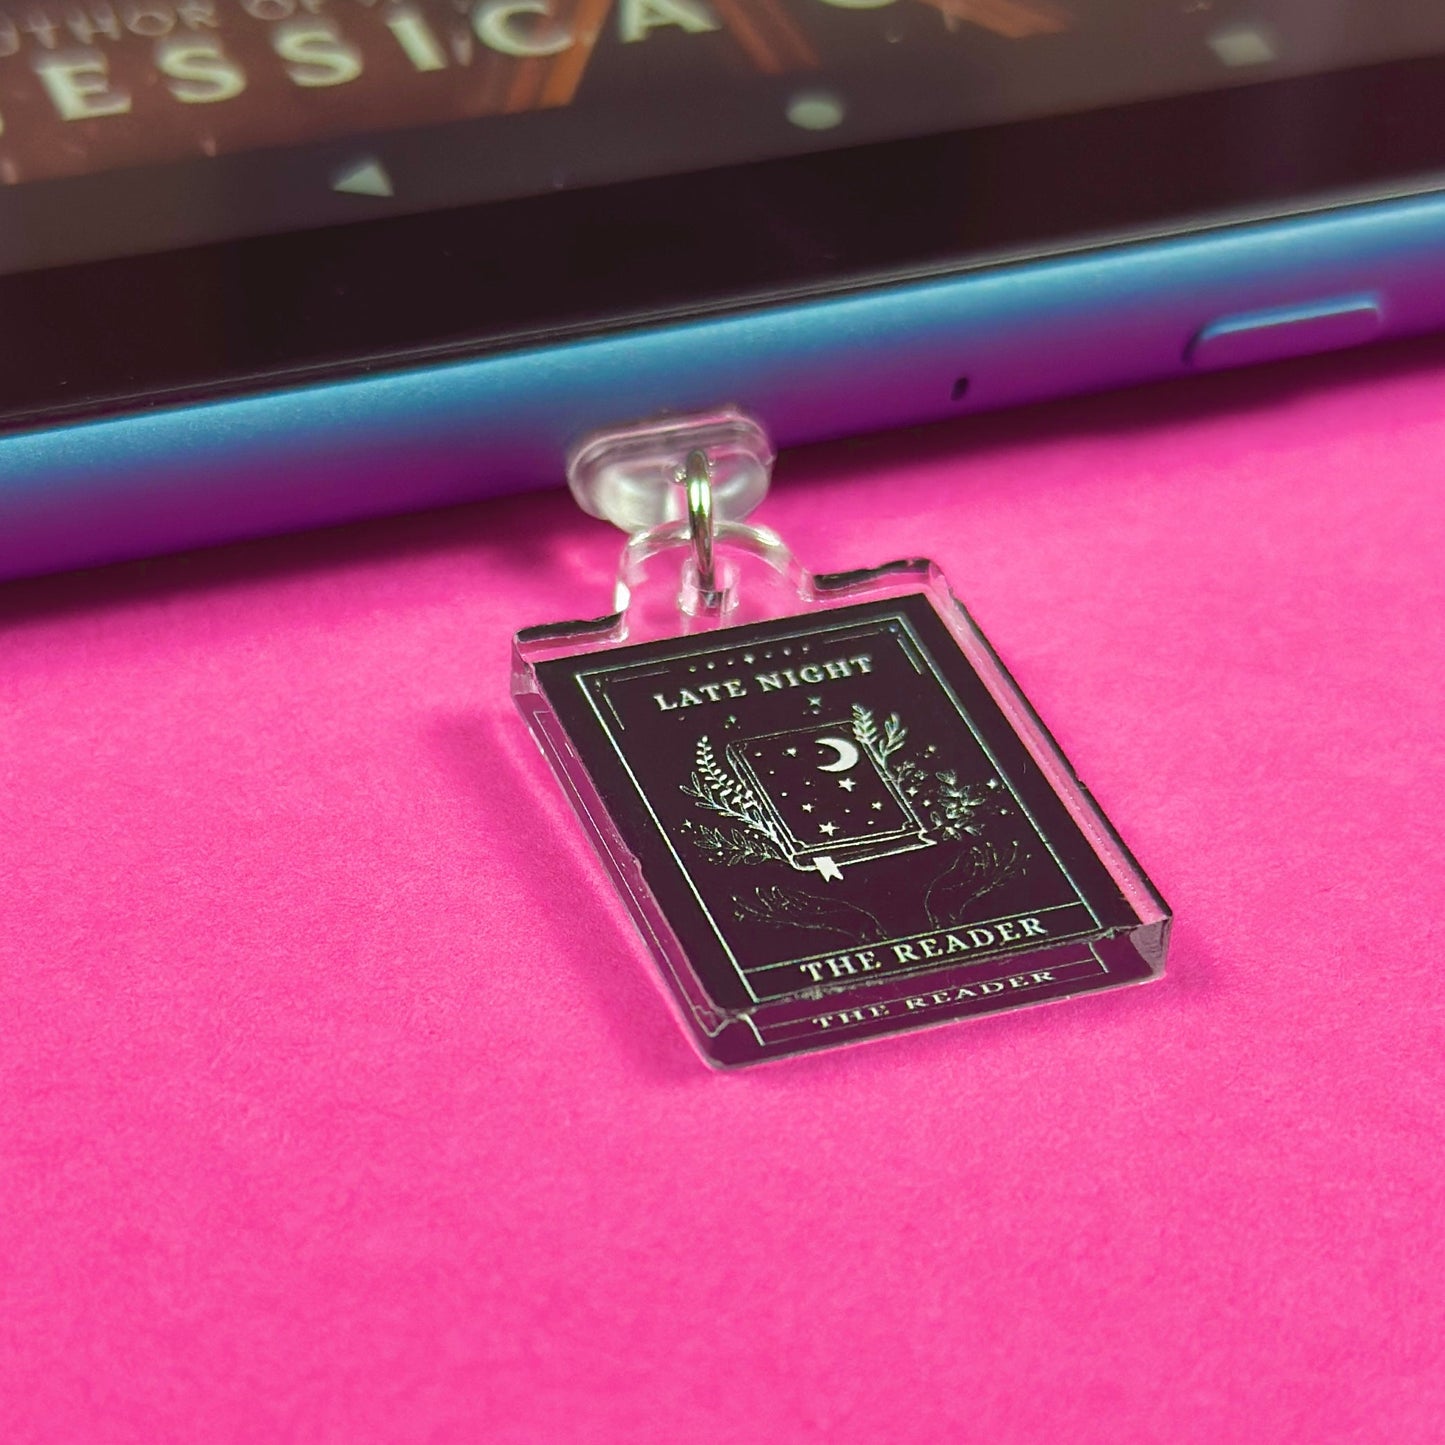 SECONDS: Late Night Reader Tarot Card Kindle Charm